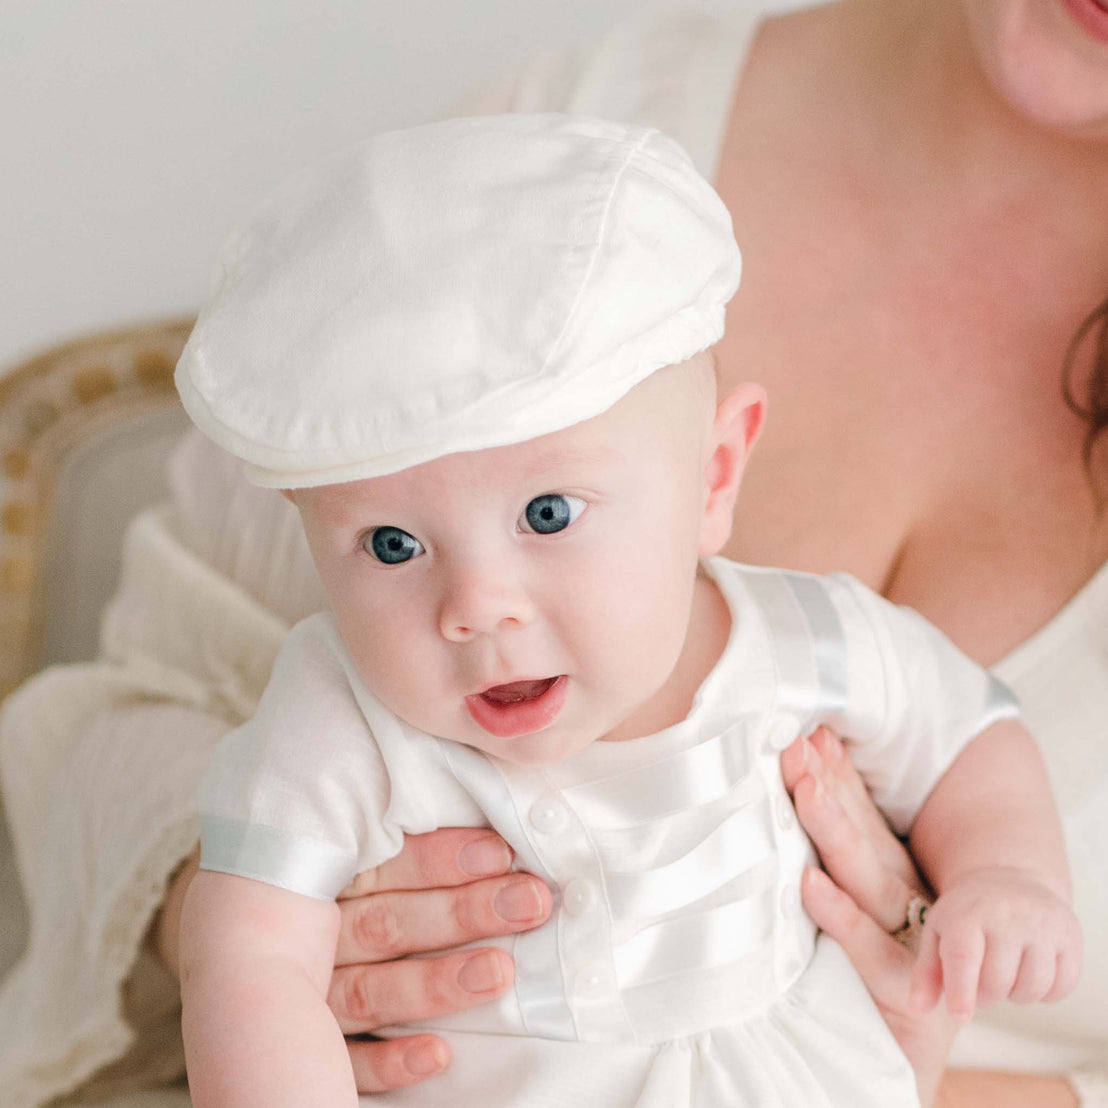 Baby boy sitting on his mother's lap and wearing the Owen Linen Newsboy Cap.